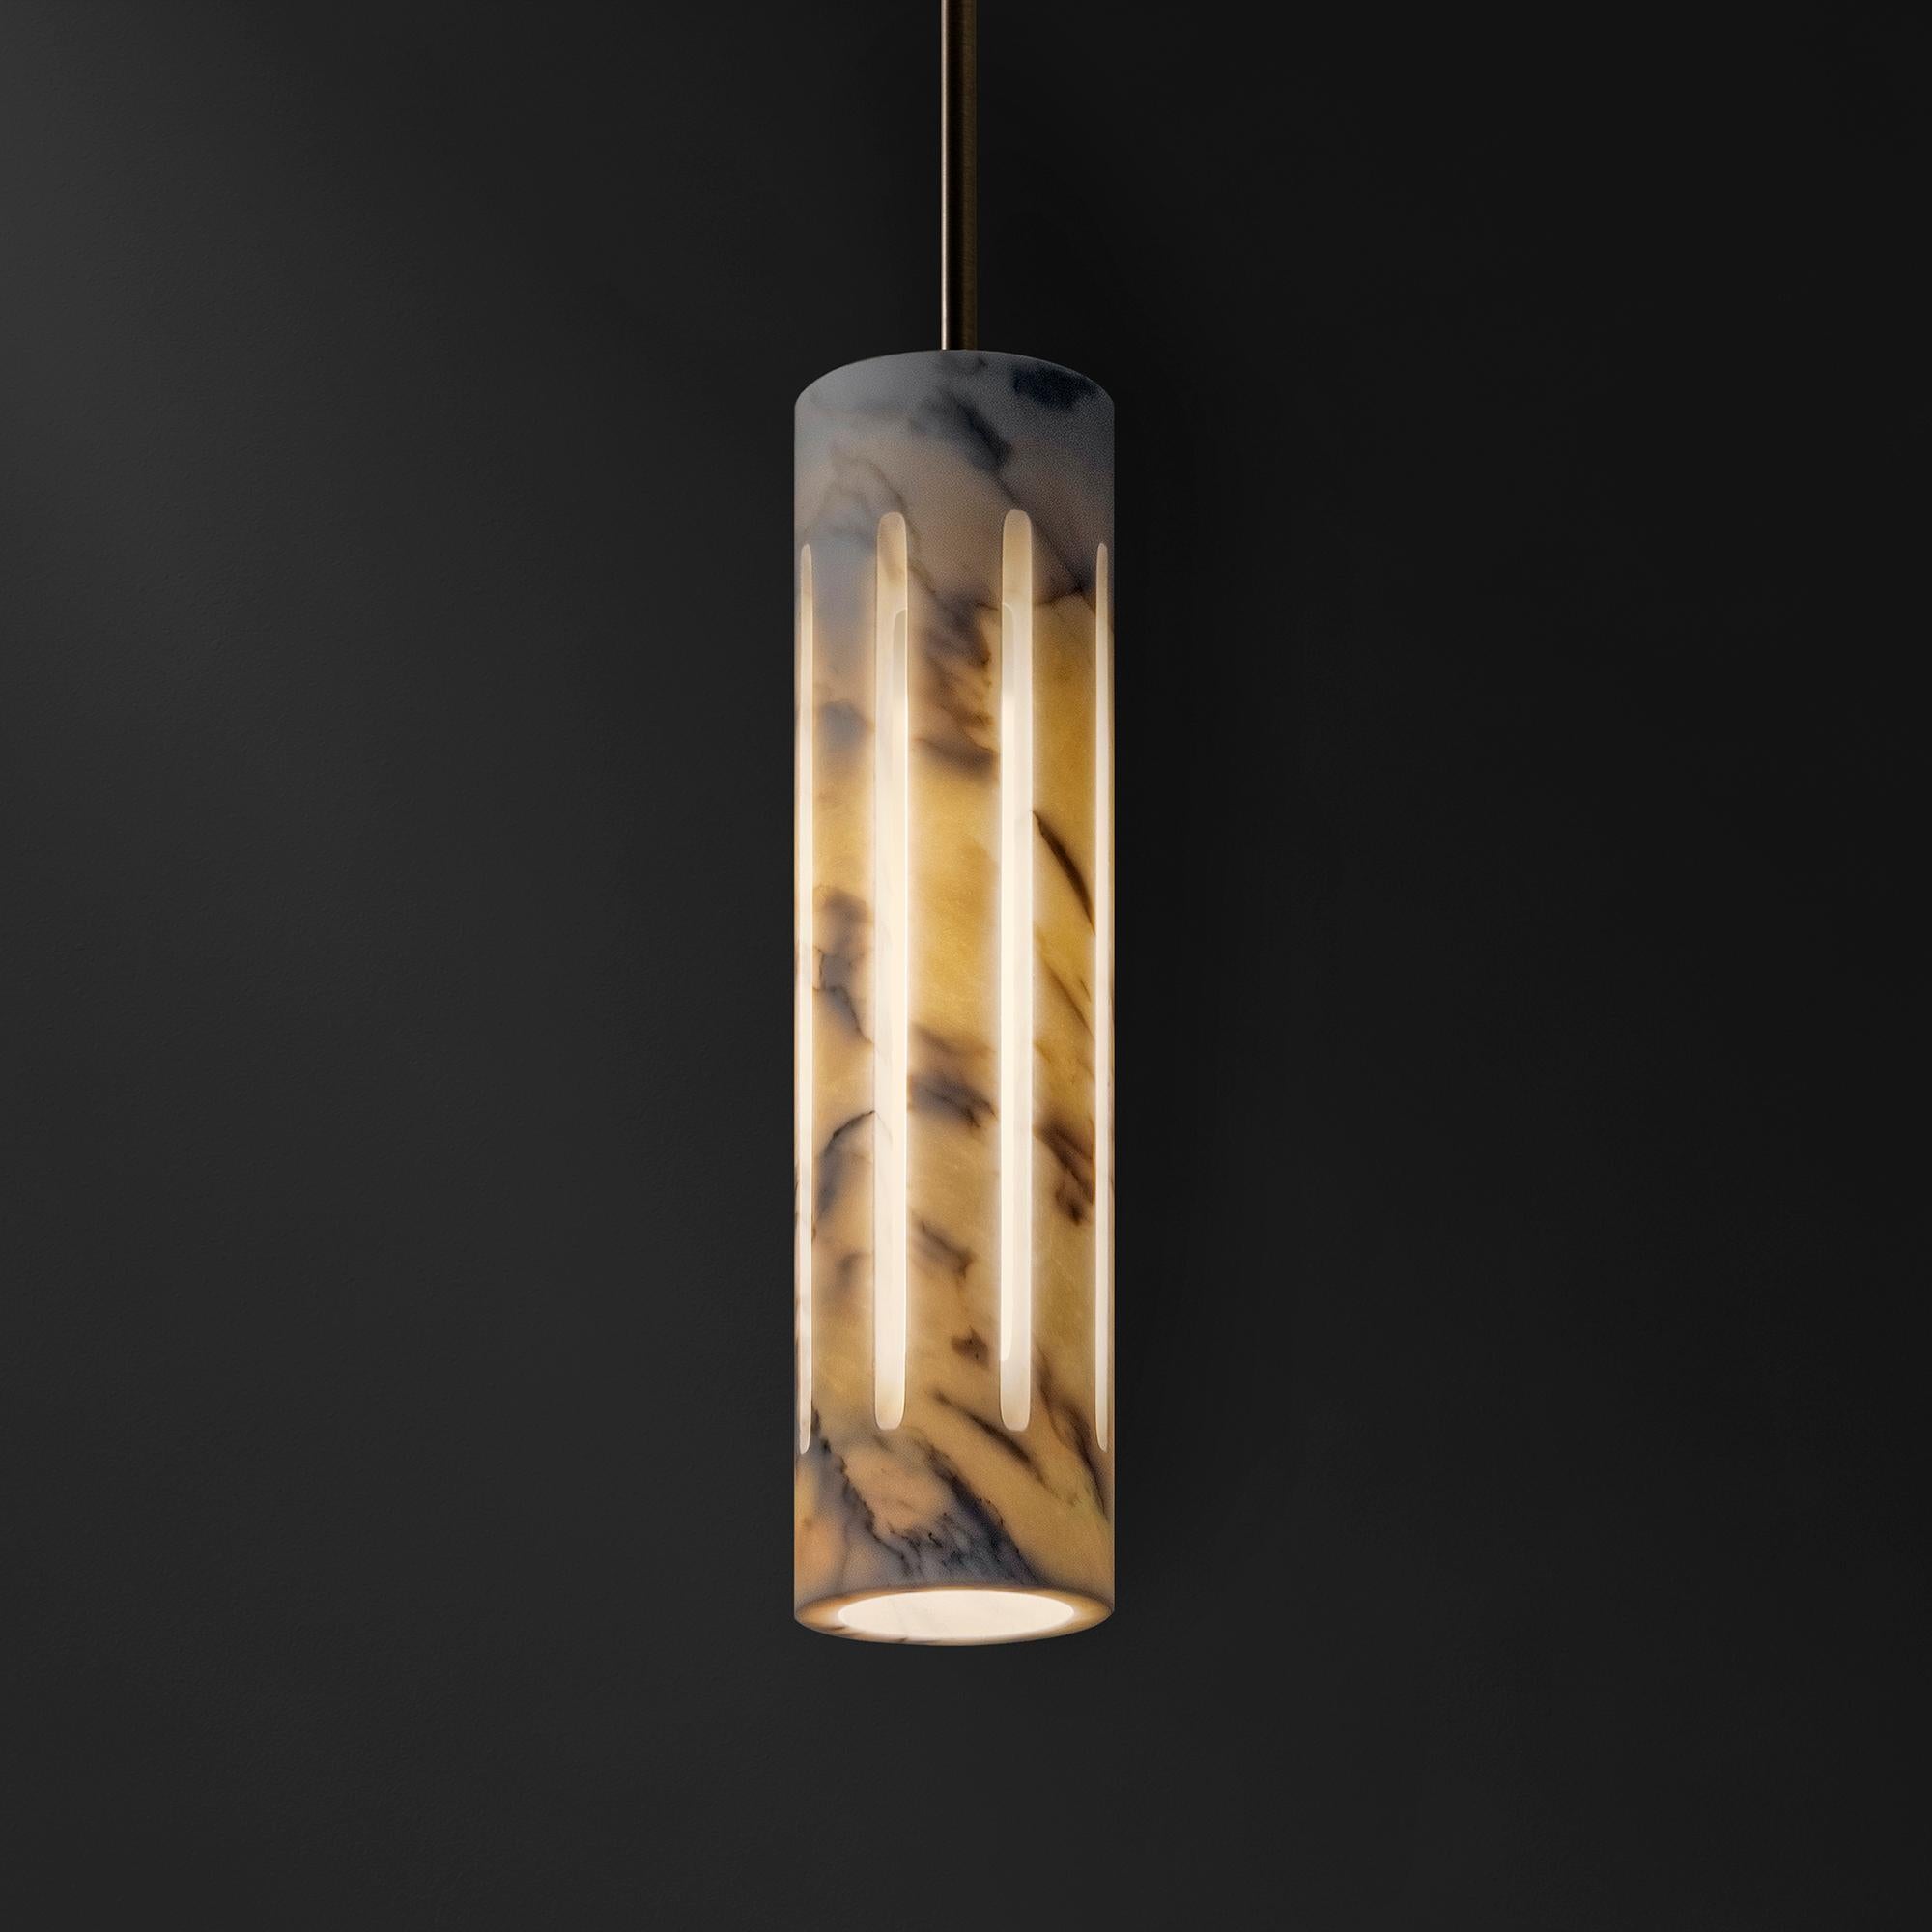 Aura is a contemporary reinterpretation of the ancient outdoor lantern.
Masterfully carved from a single block of Calacata Borghini marble, Aura is both a lighting fixture and a sculpture. Vertical cuts on the cylindrical surface allow light to